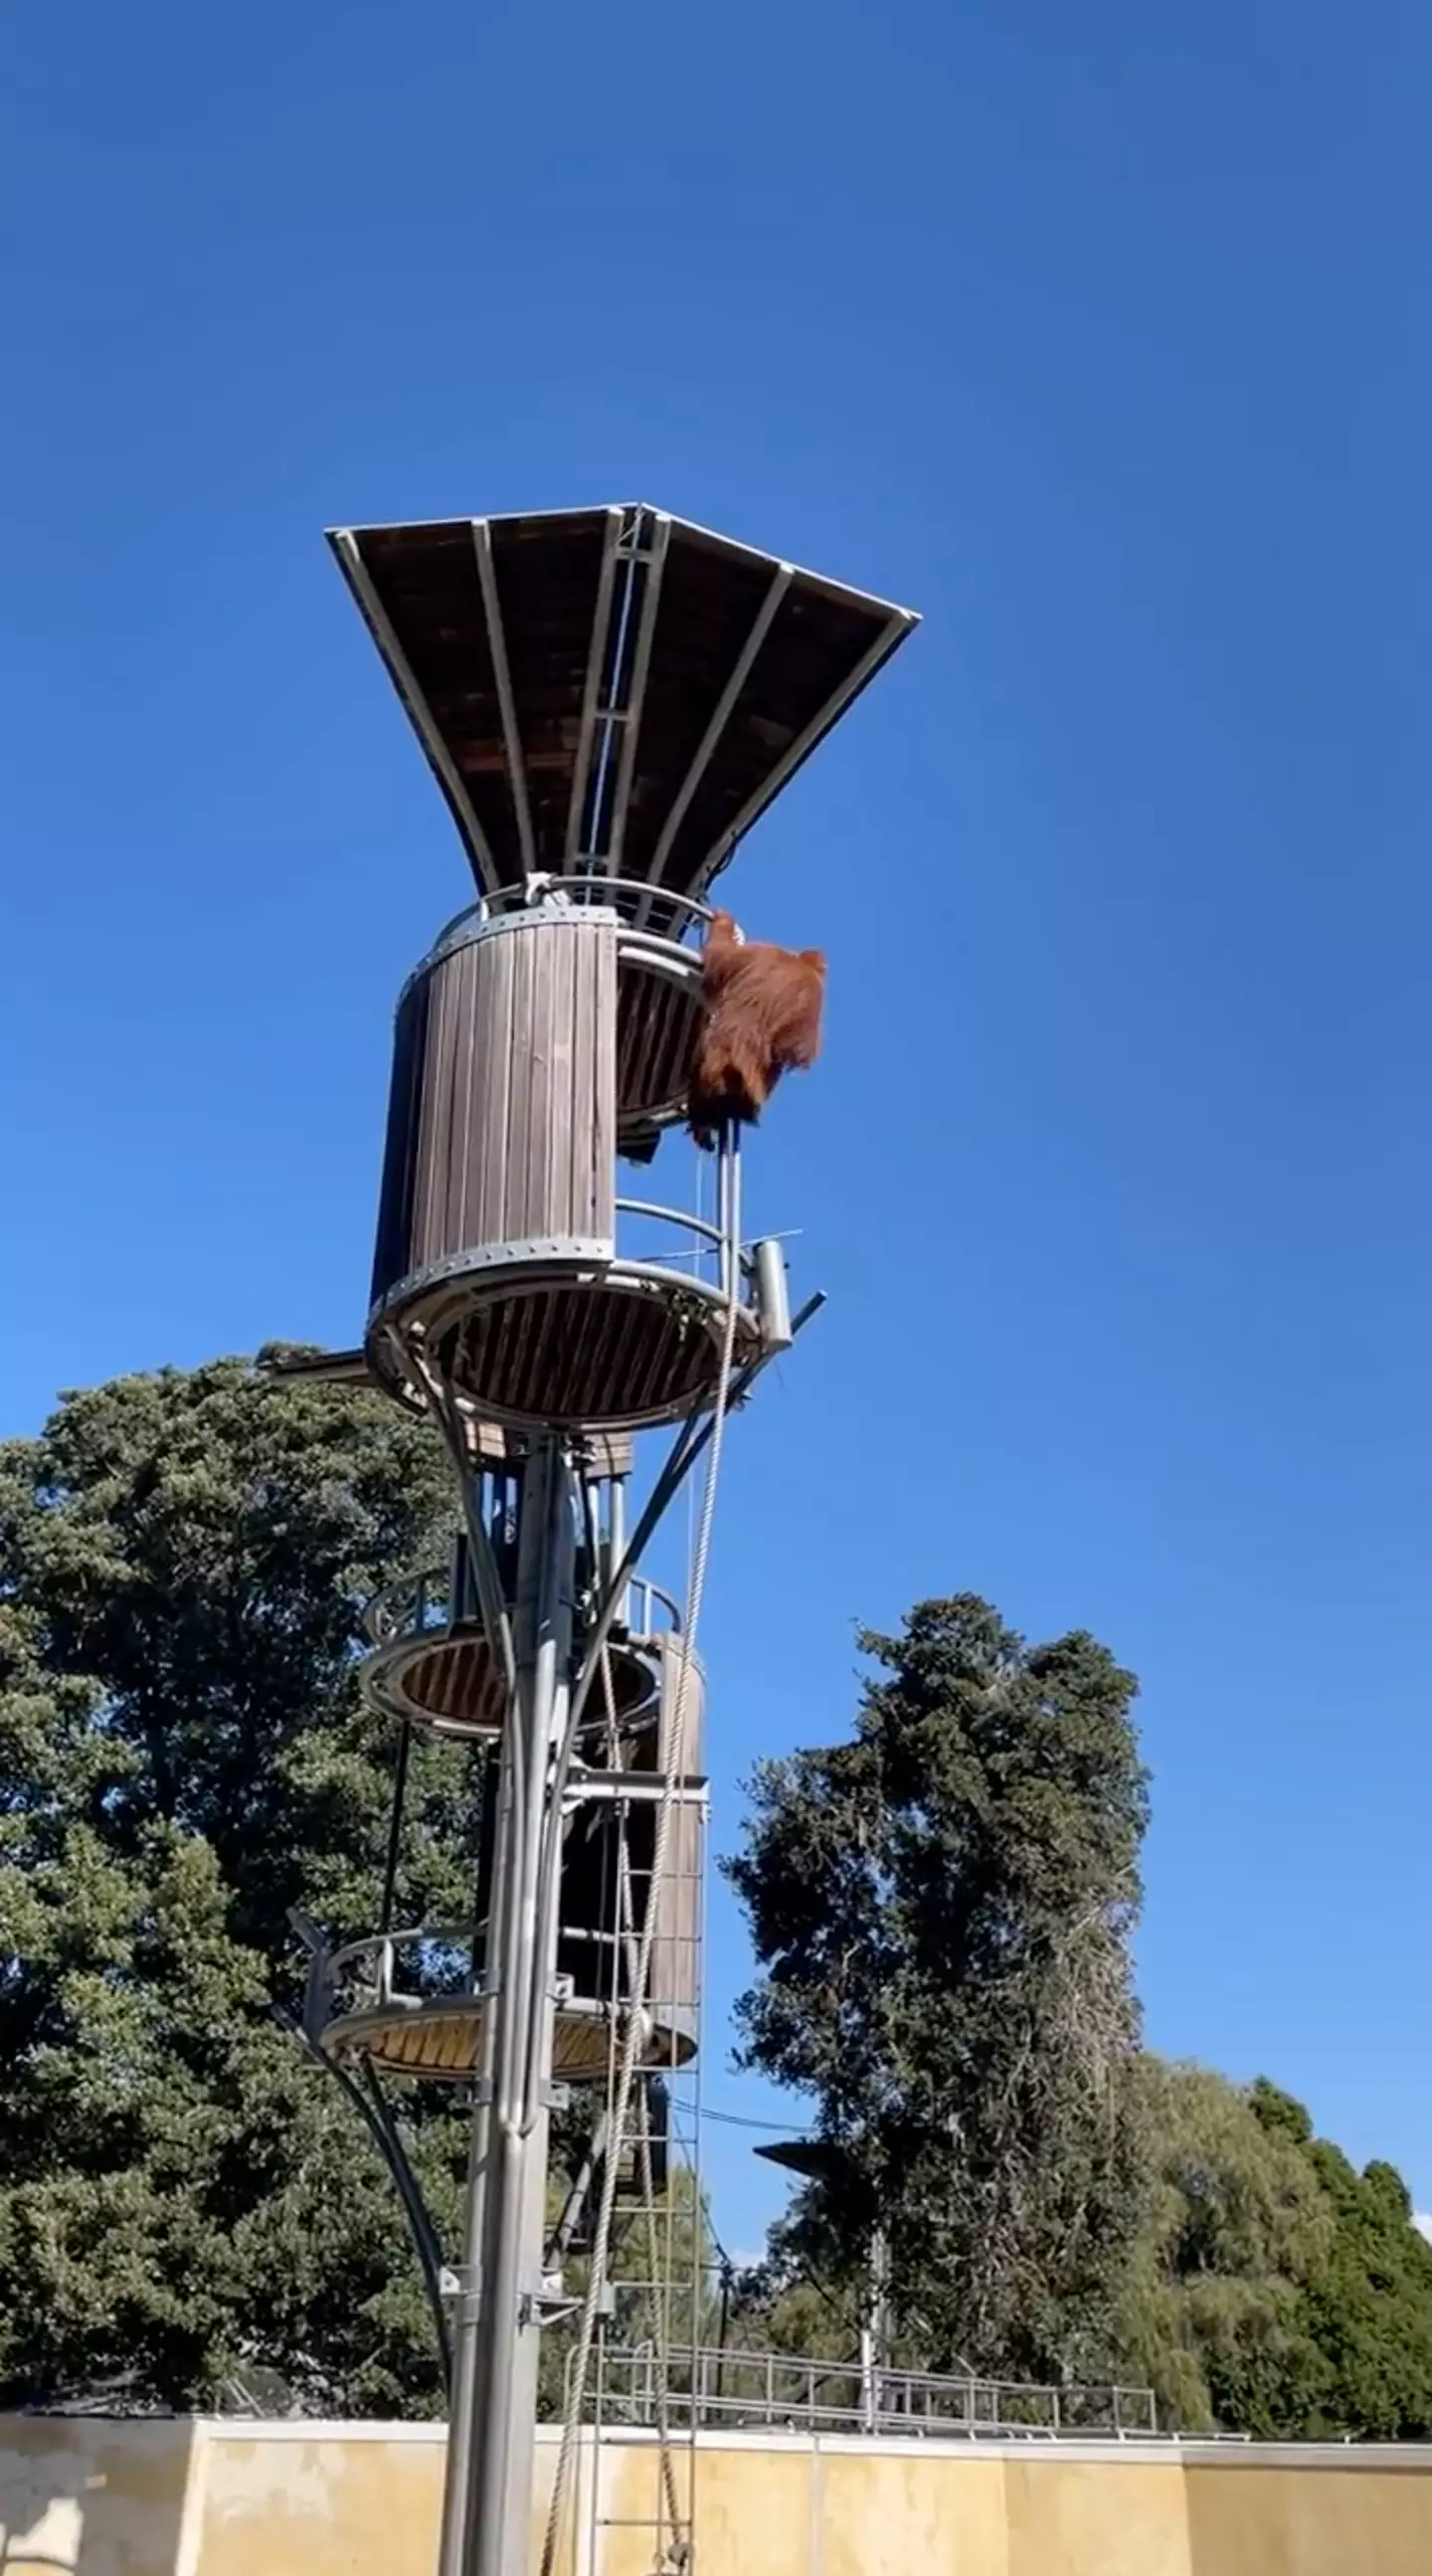 The Orangutan 'evicted' the unwanted possum from its tree house.